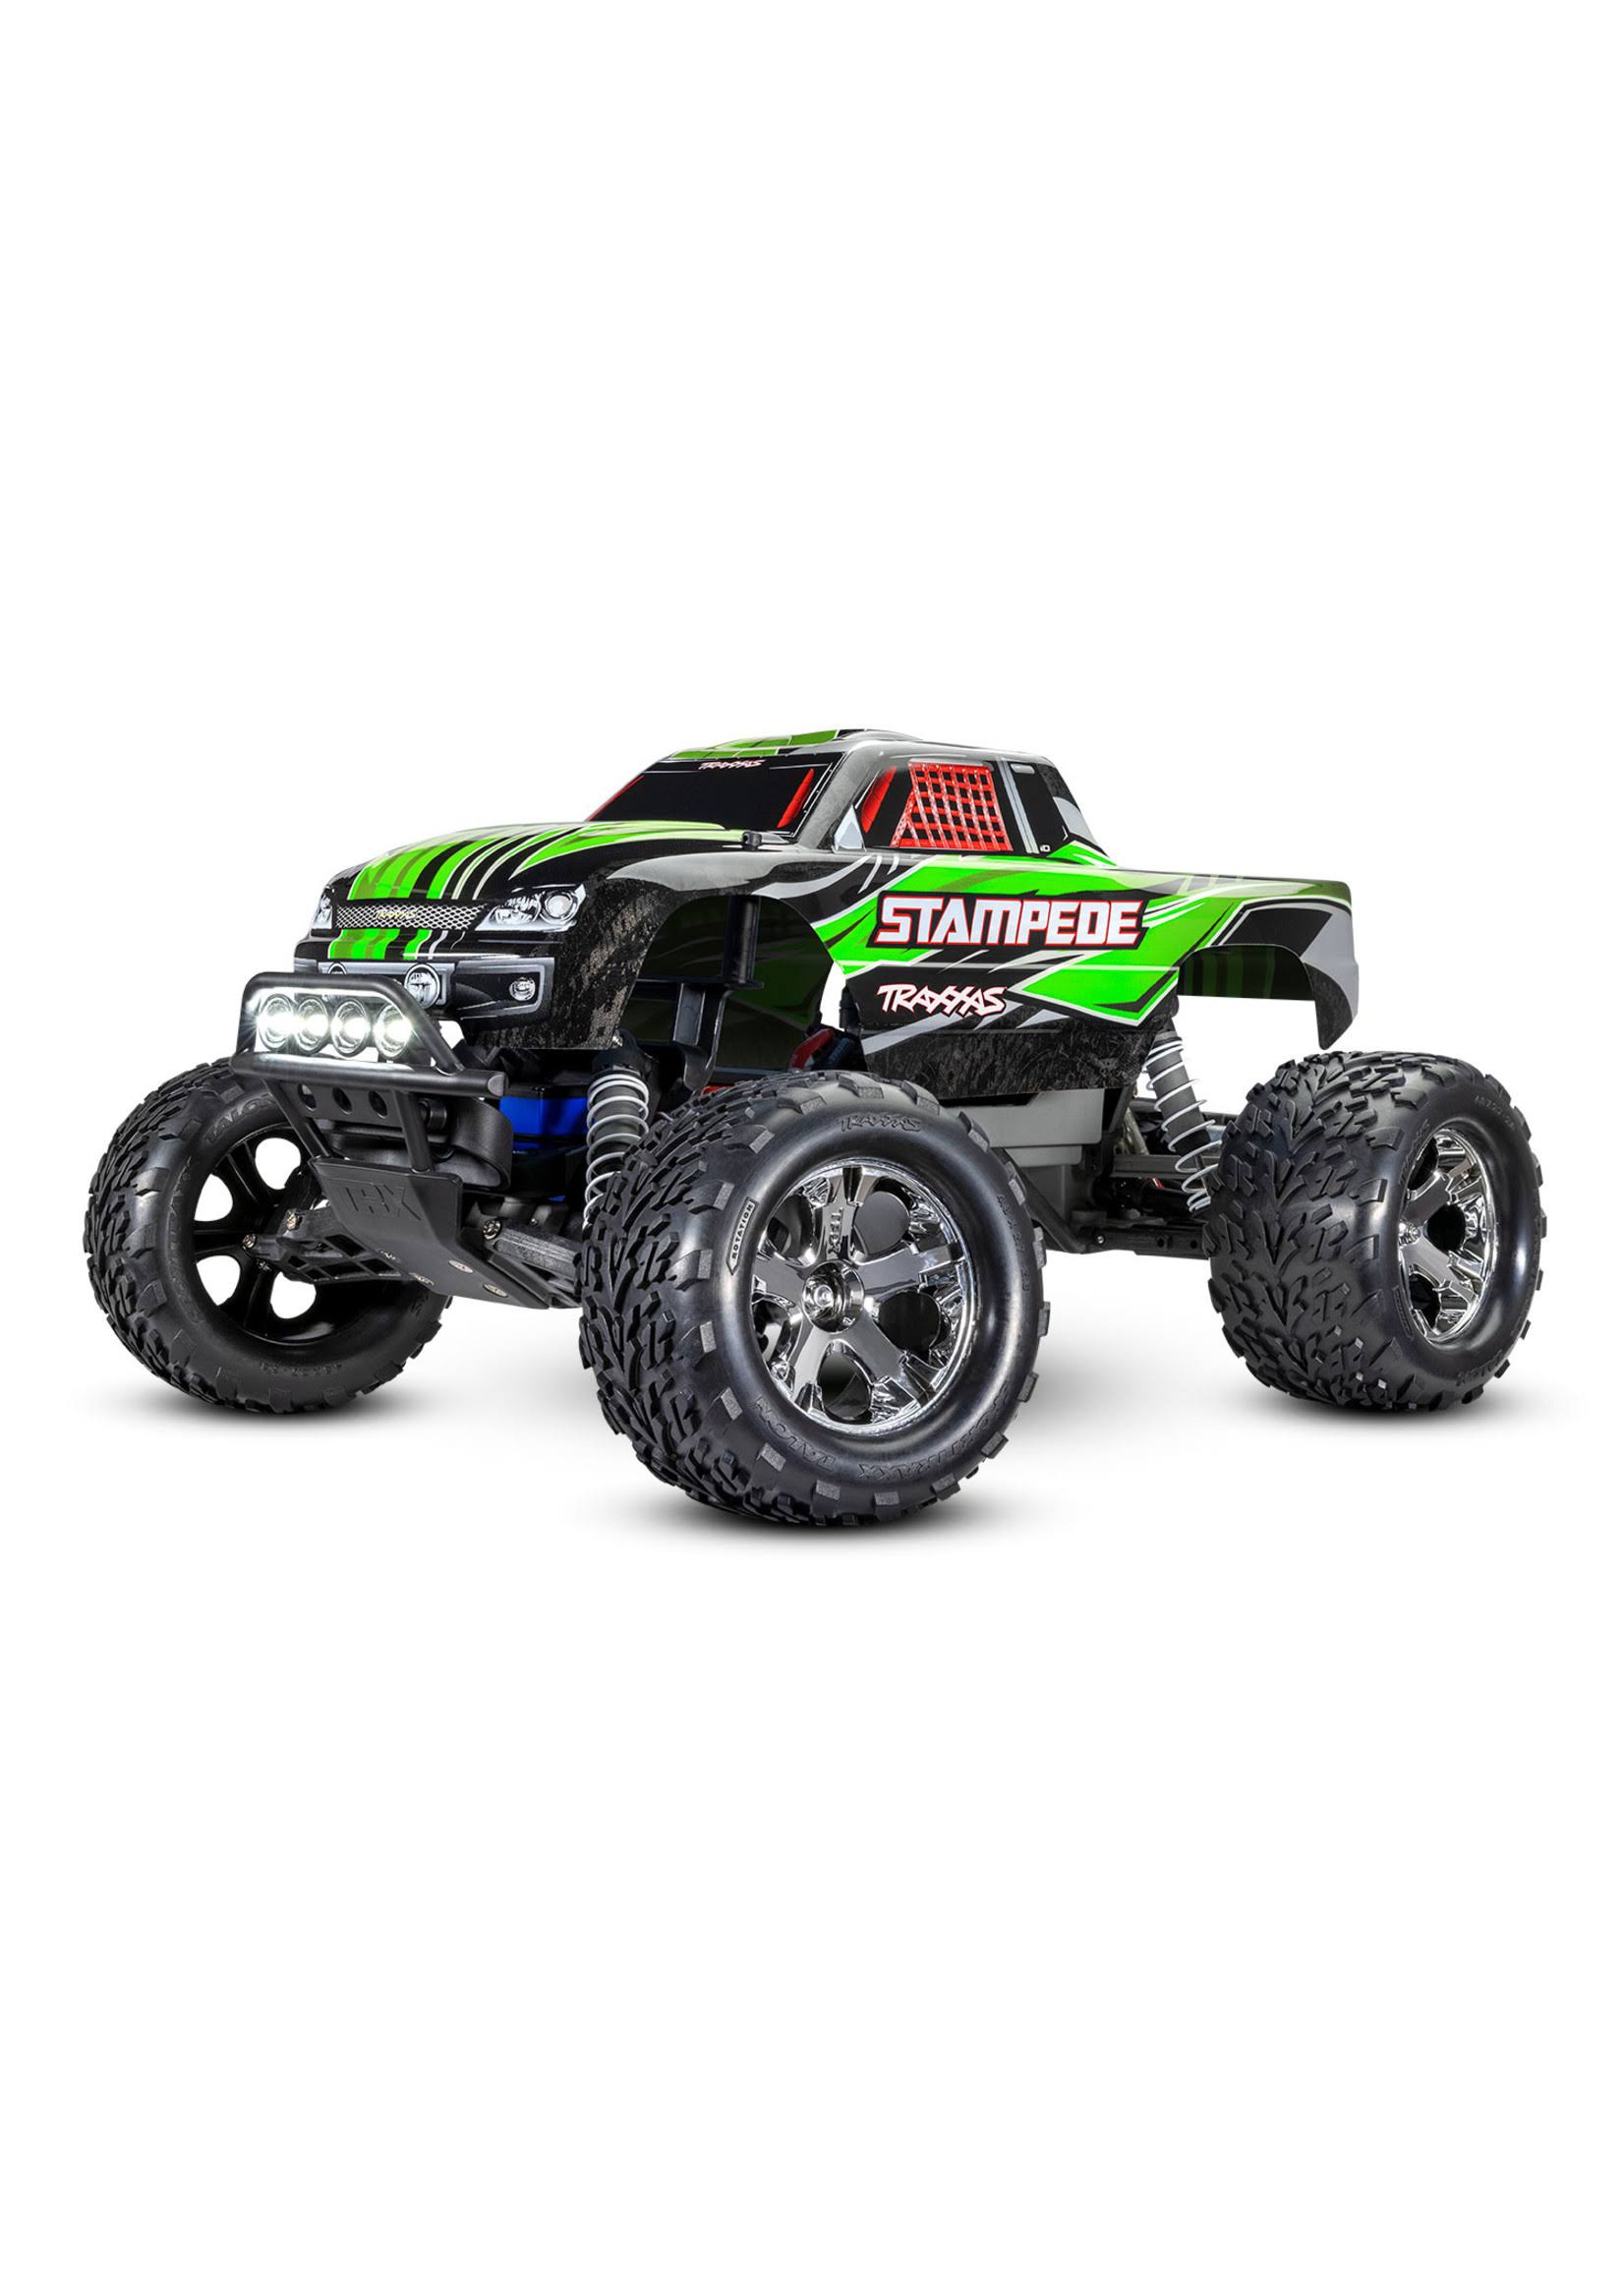 Traxxas Stampede XL-5 2WD Monster Truck - Green with LED TRX36054-61-GRN